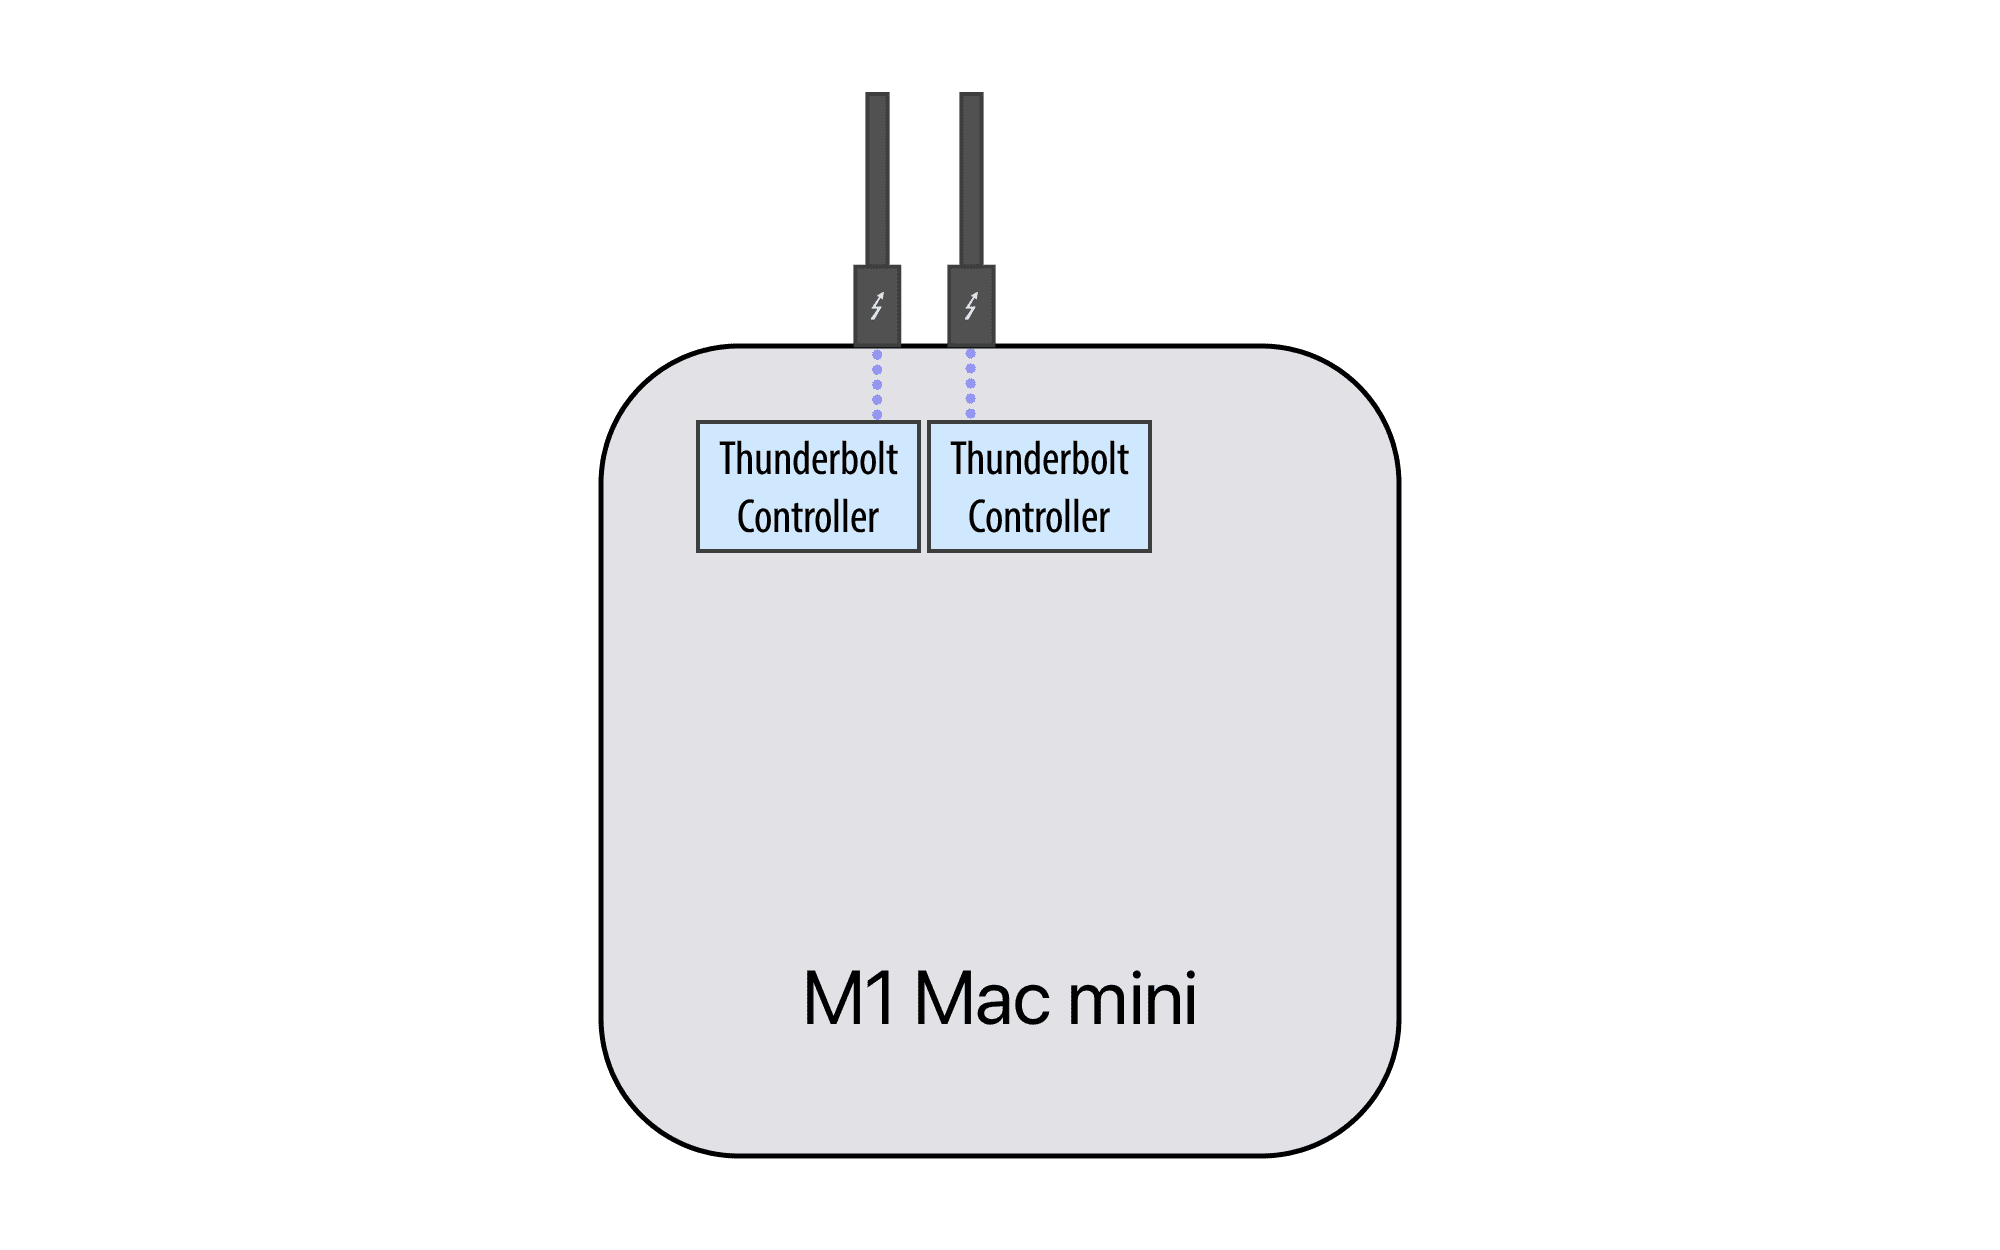 Infographic showing Thunderbolt controllers on an M1 Mac mini